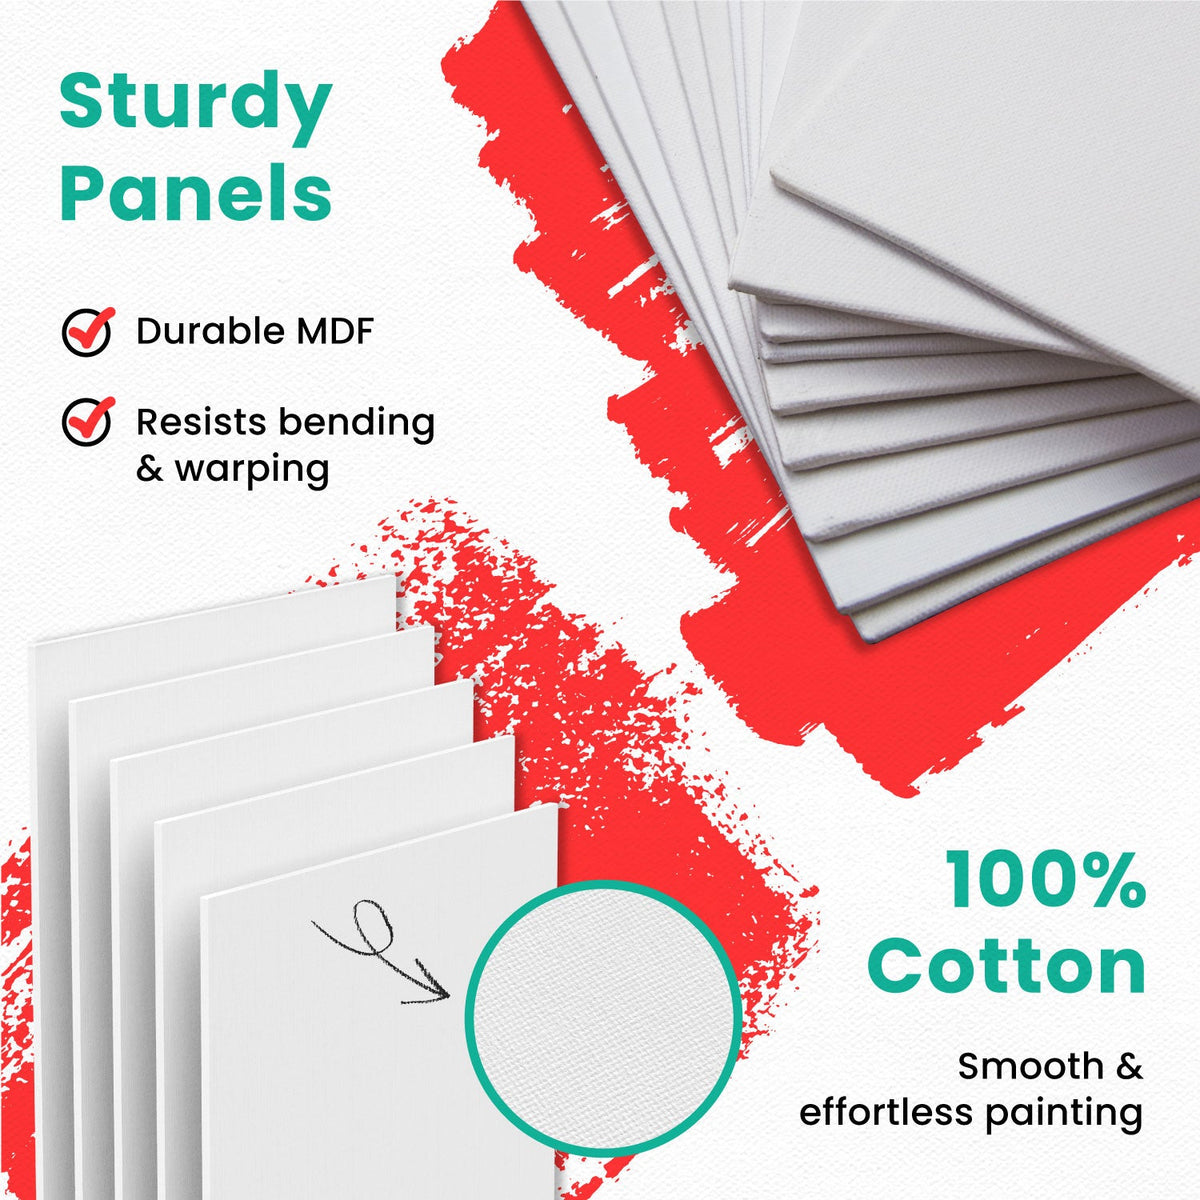 Painting Canvas Panels | 11x14 inch (15 Pack)